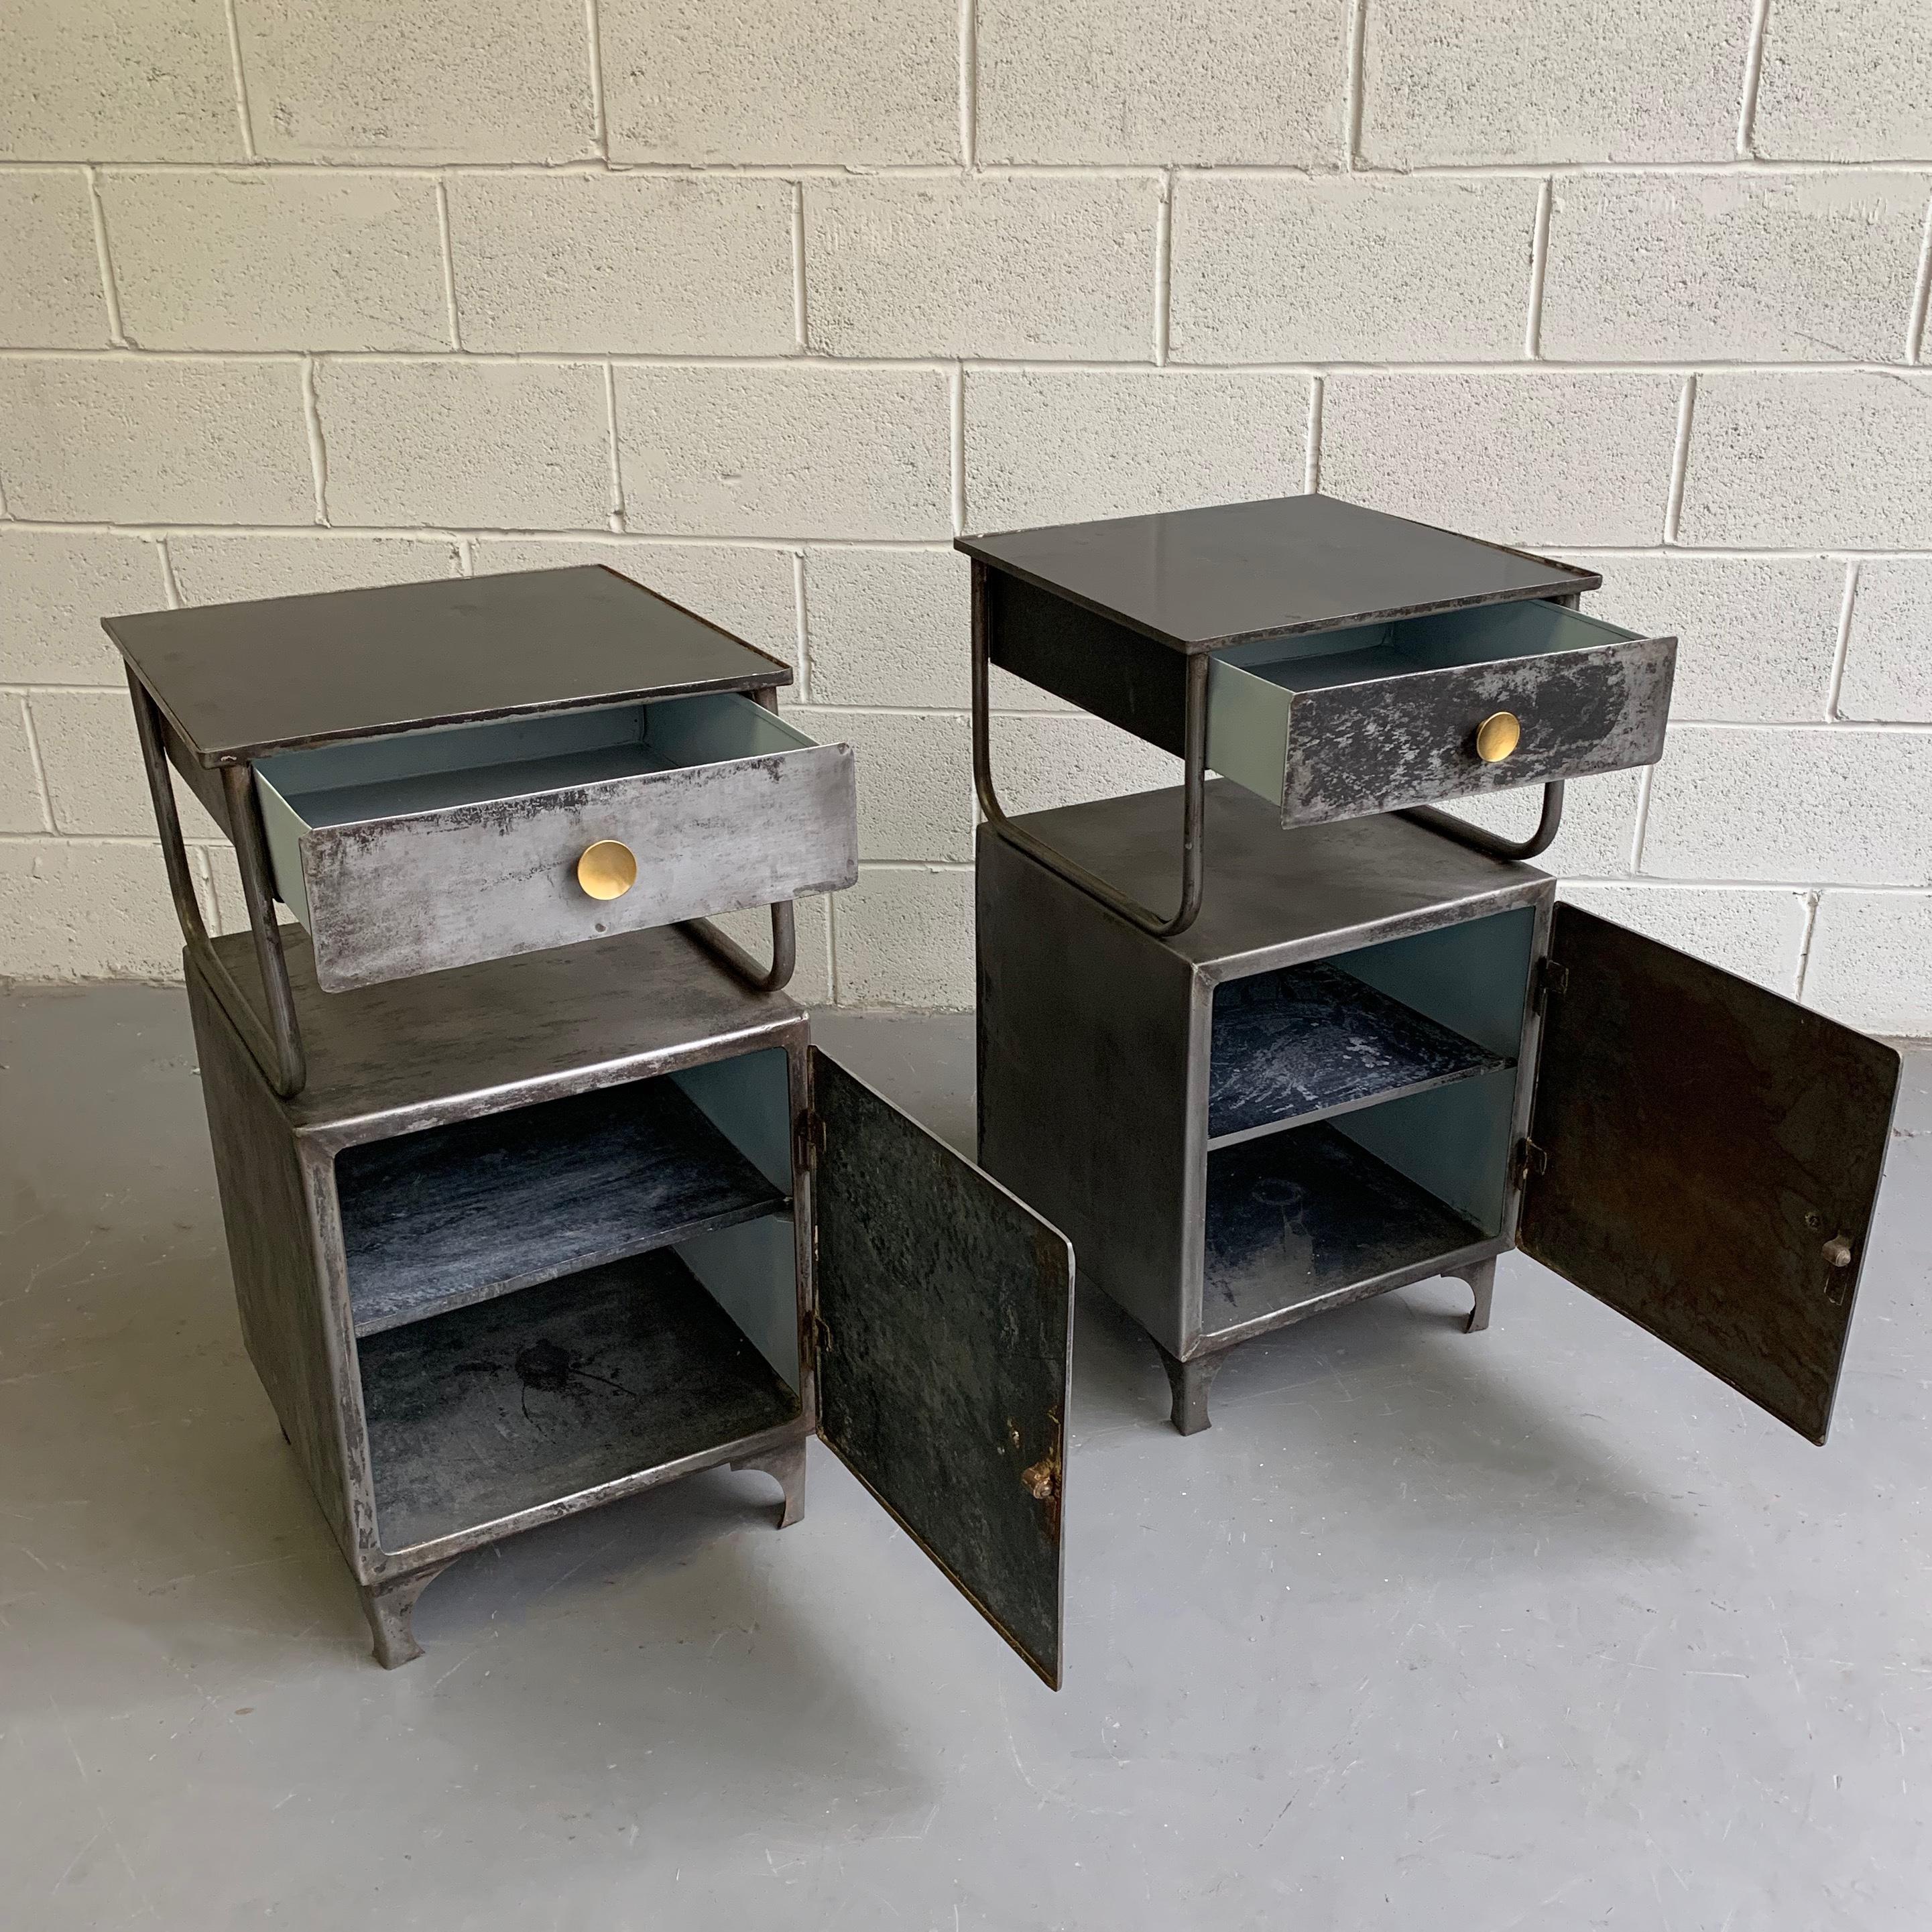 Brass Industrial Brushed Steel Hospital Nightstand Cabinets